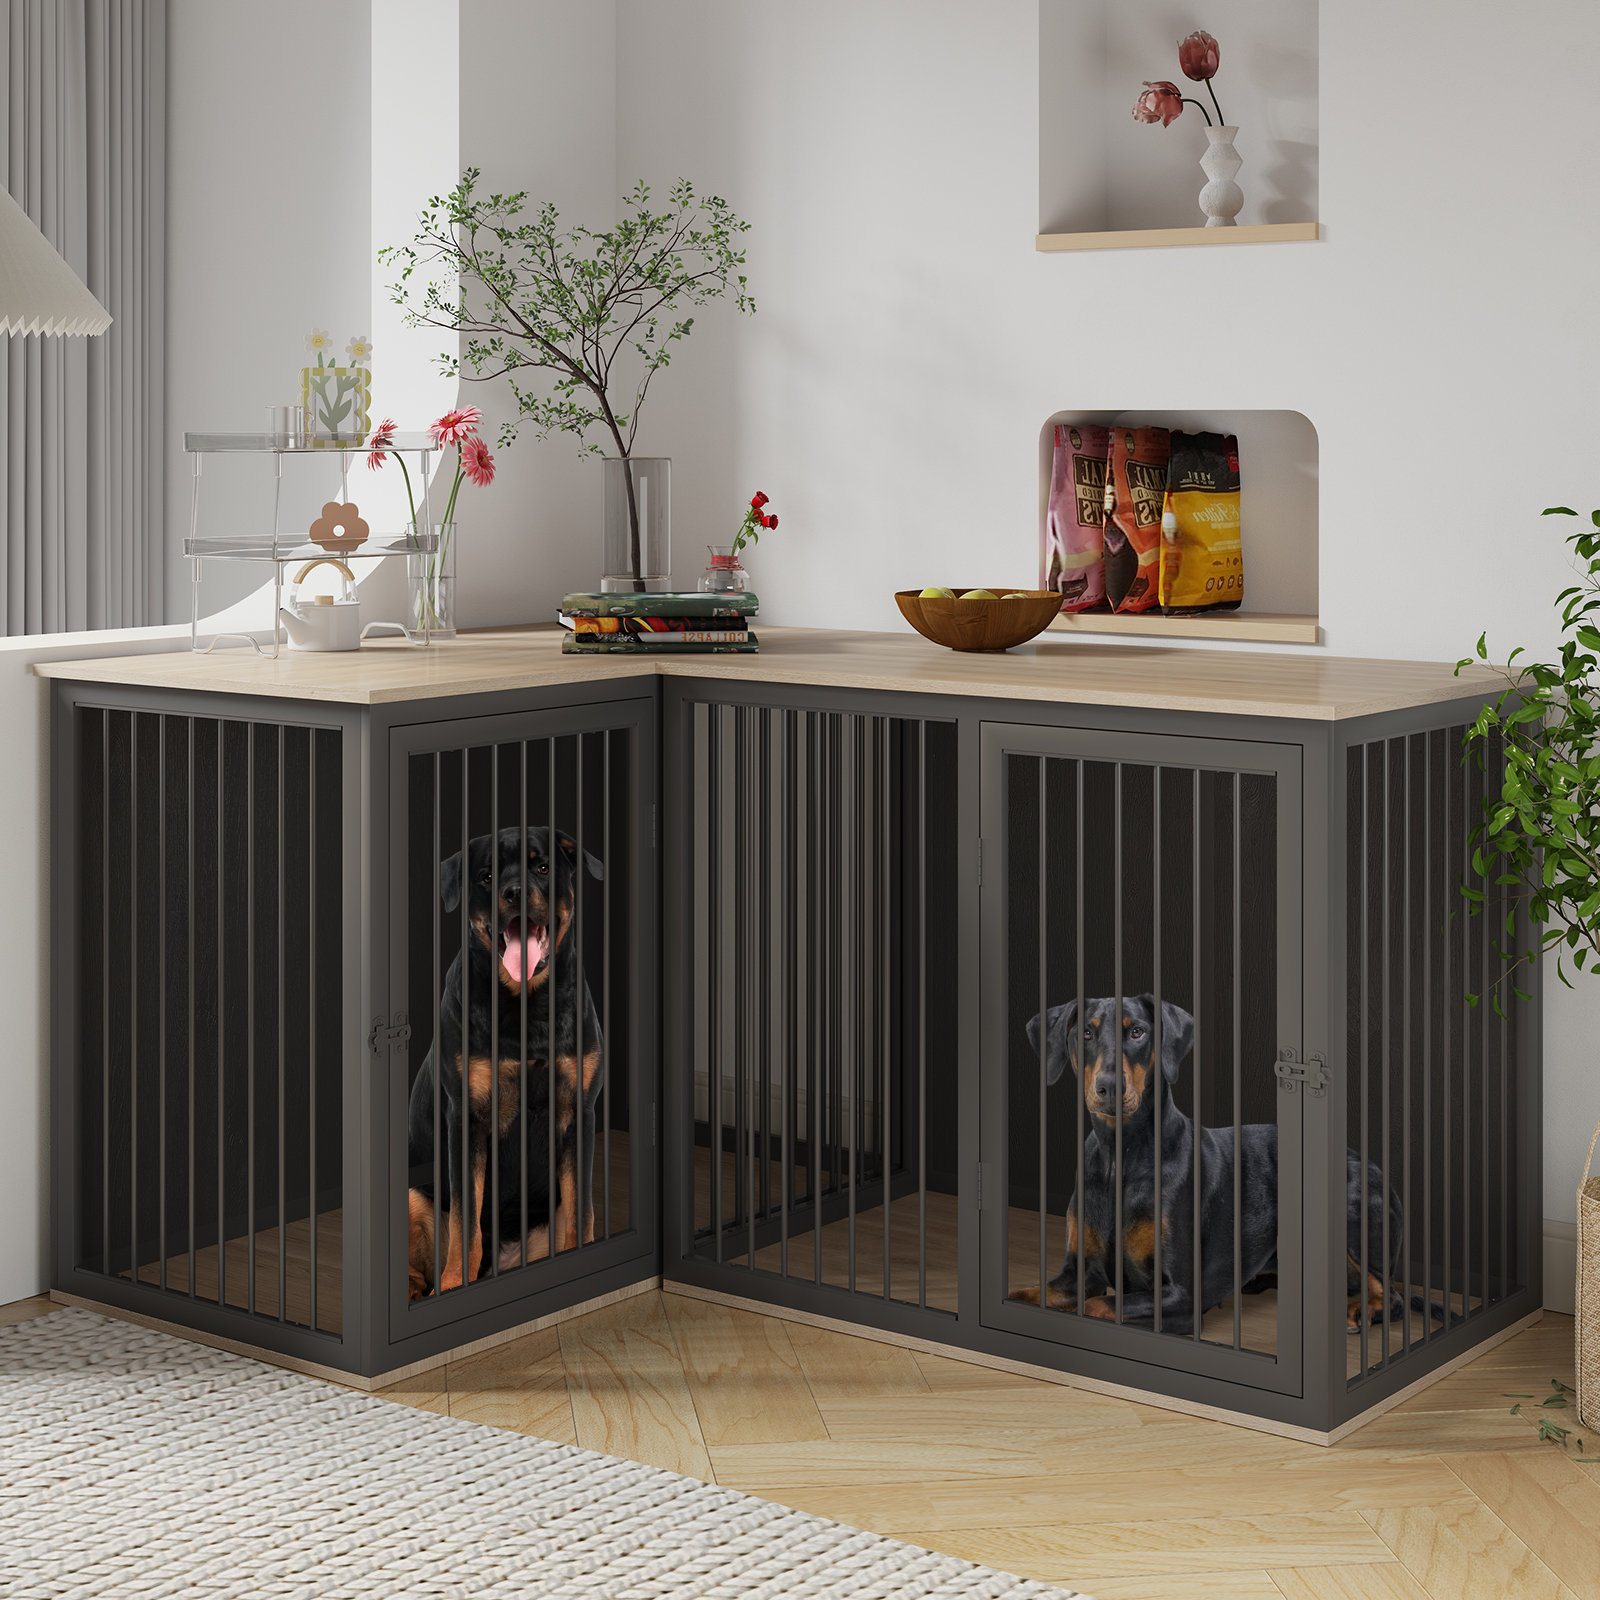 Dog house with plexiglass sliding door, kennel for dogs from small